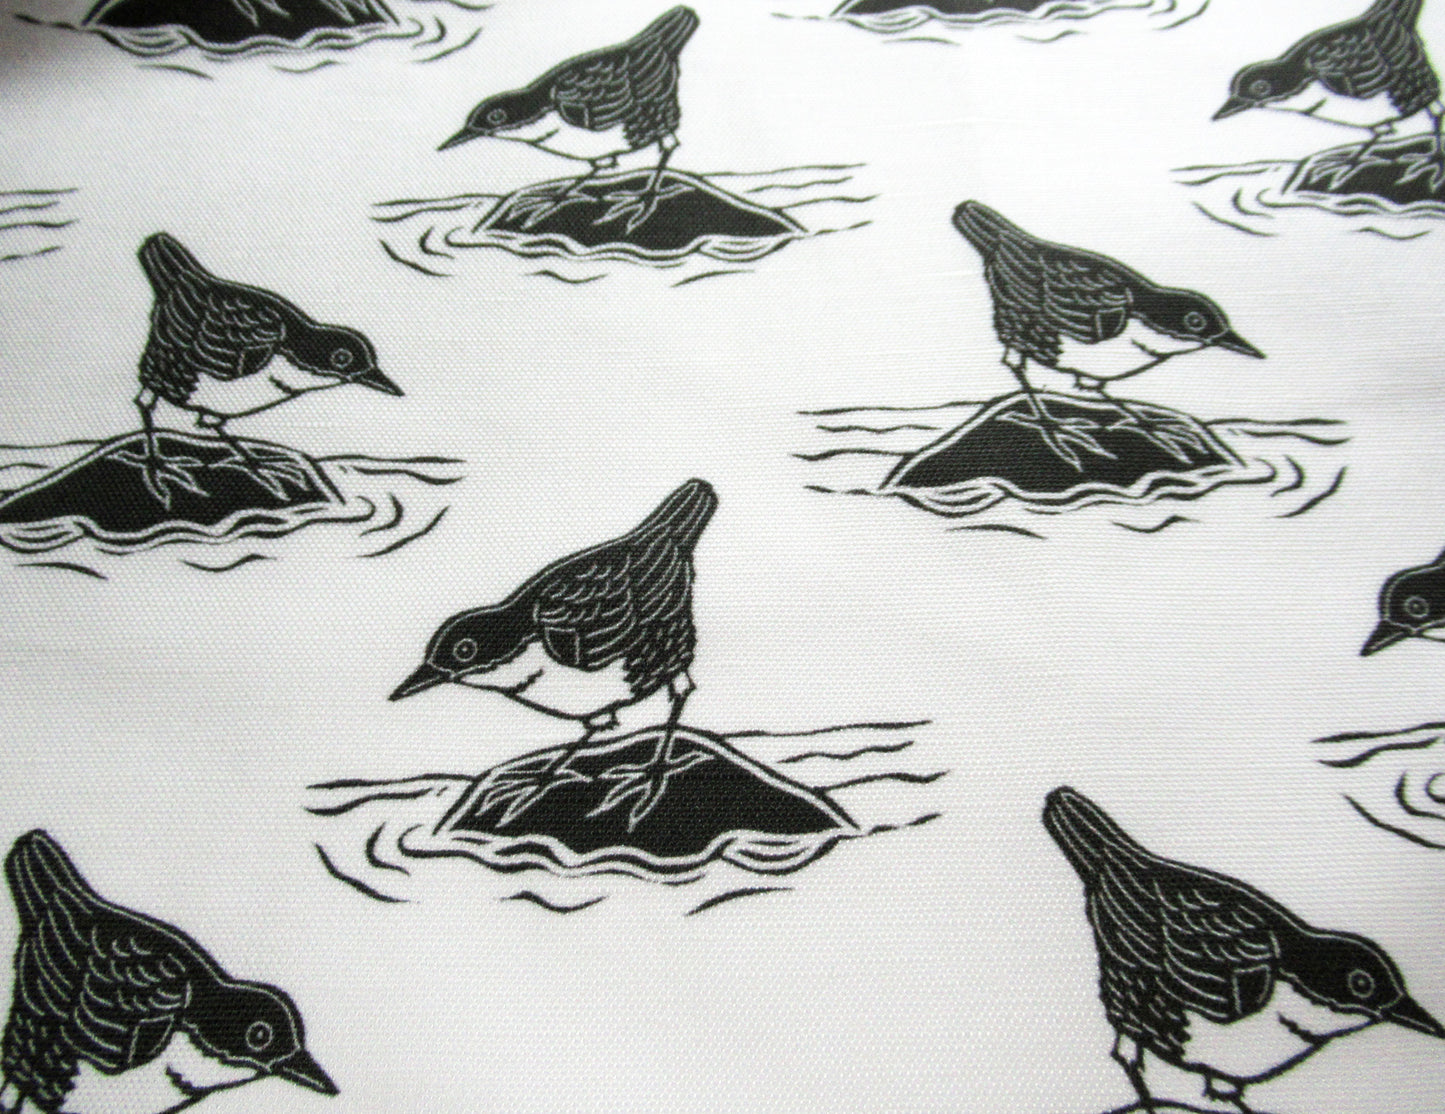 Dipper on Rock Fabric and Wallpaper